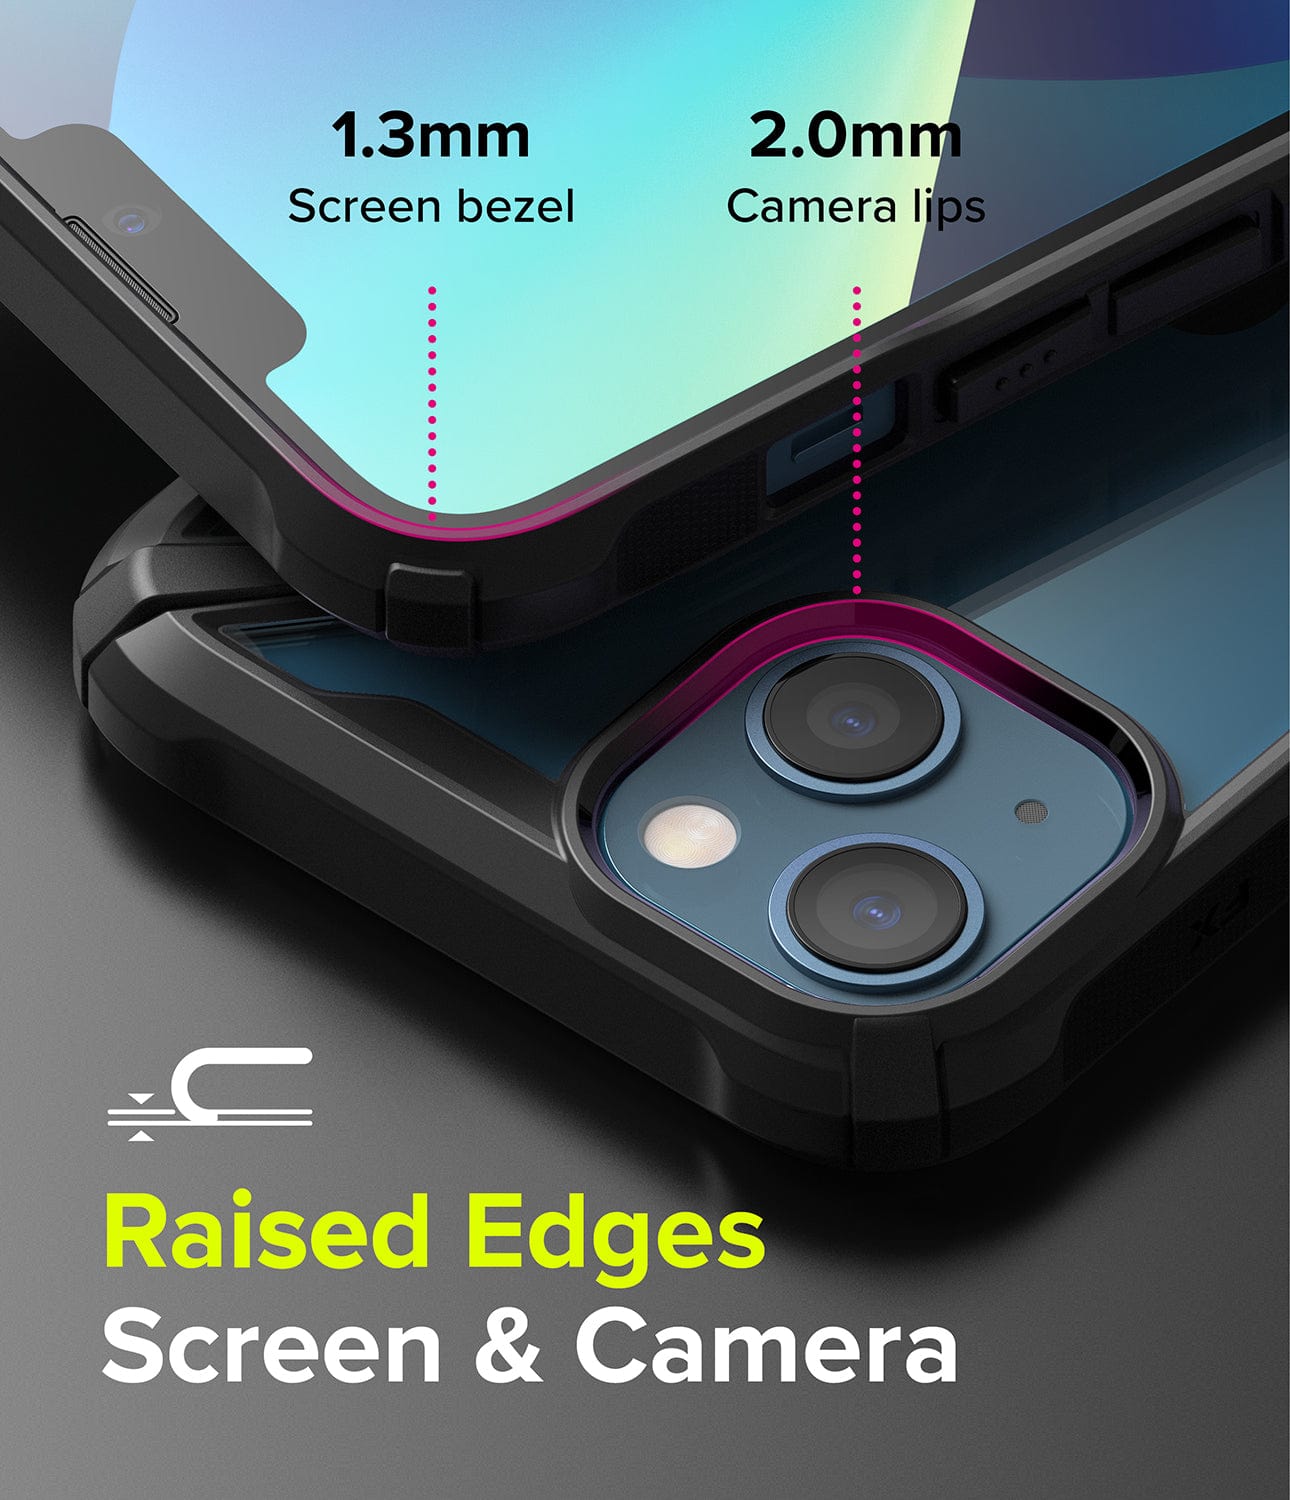 Ringke case is more protective with raised edges screen and camera 